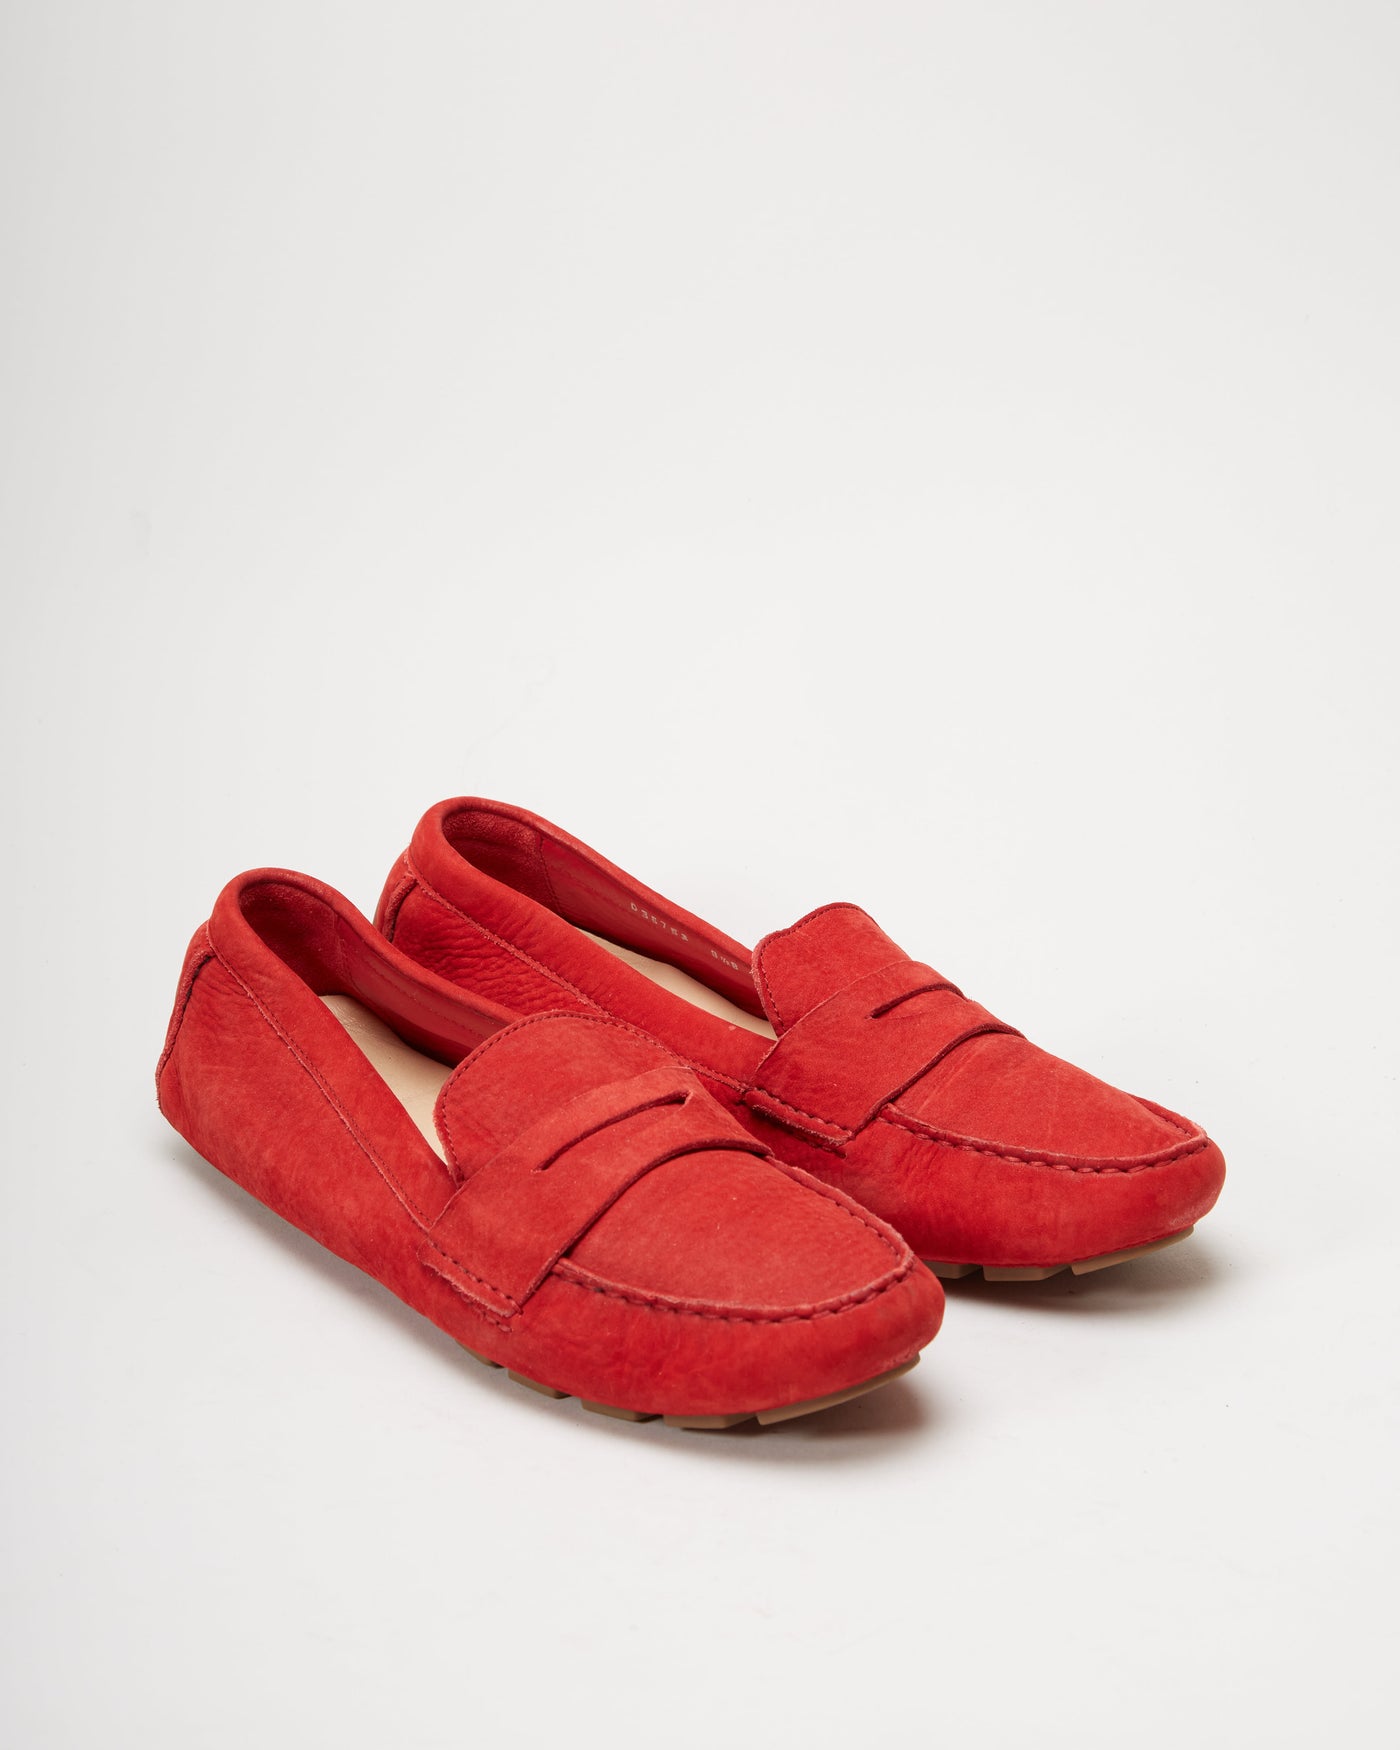 Cole Haan Red Suede Nike Air Sole Loafer Shoes - UK 9.5 – Rokit